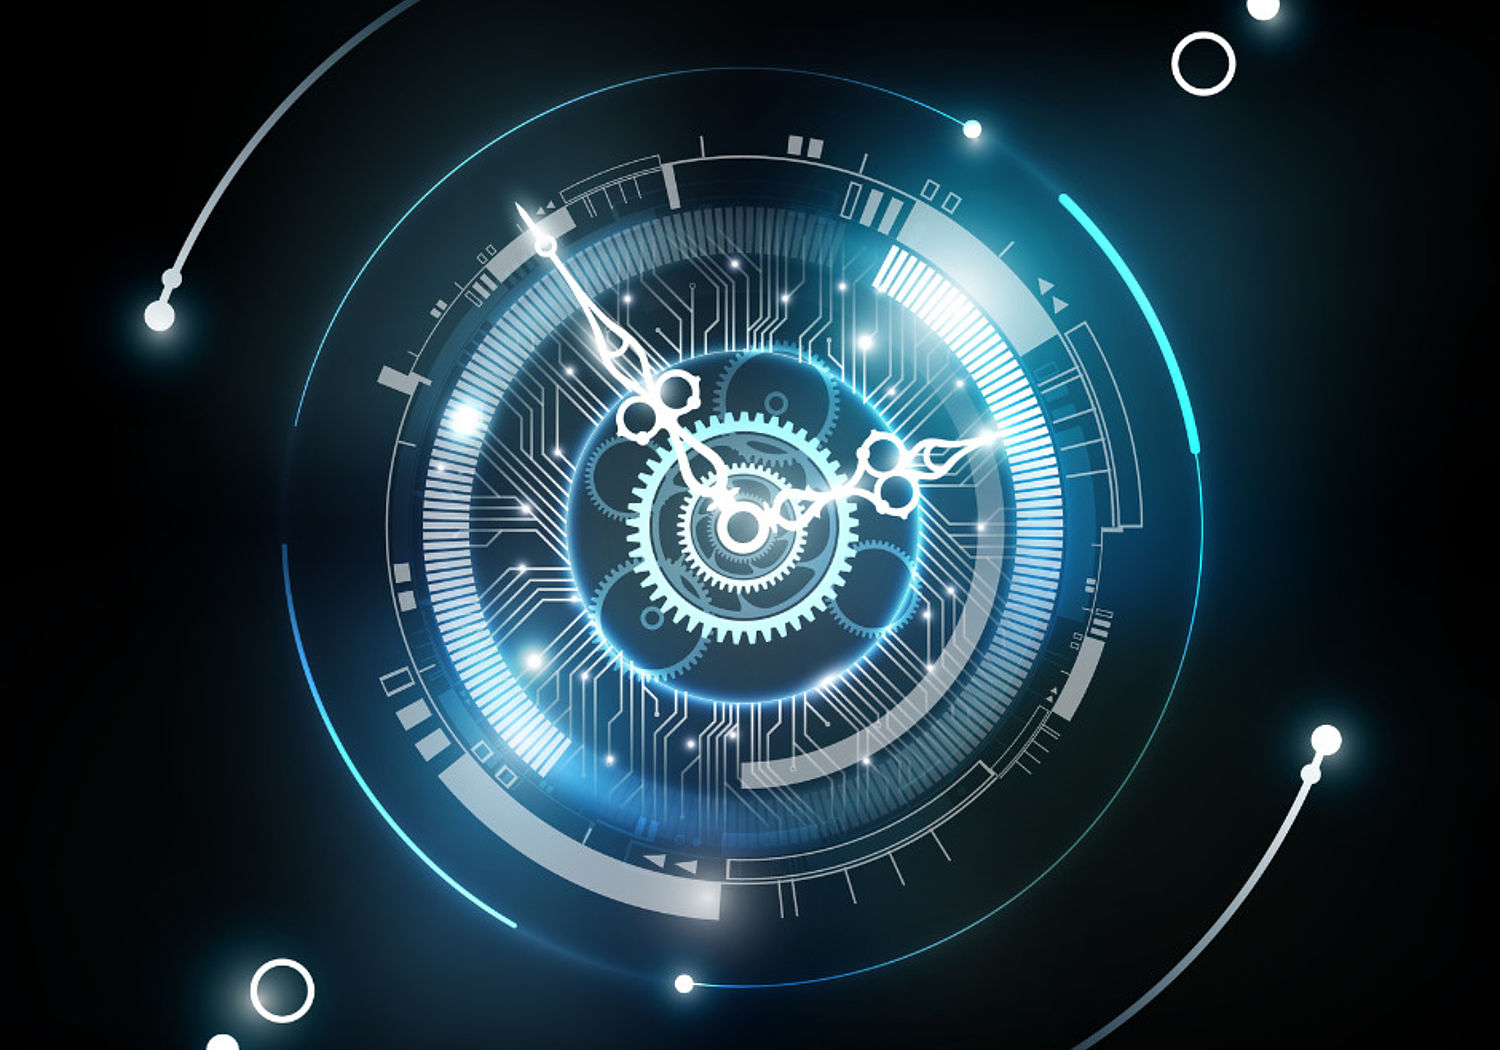 Image of a glowing clock face with rotating hands